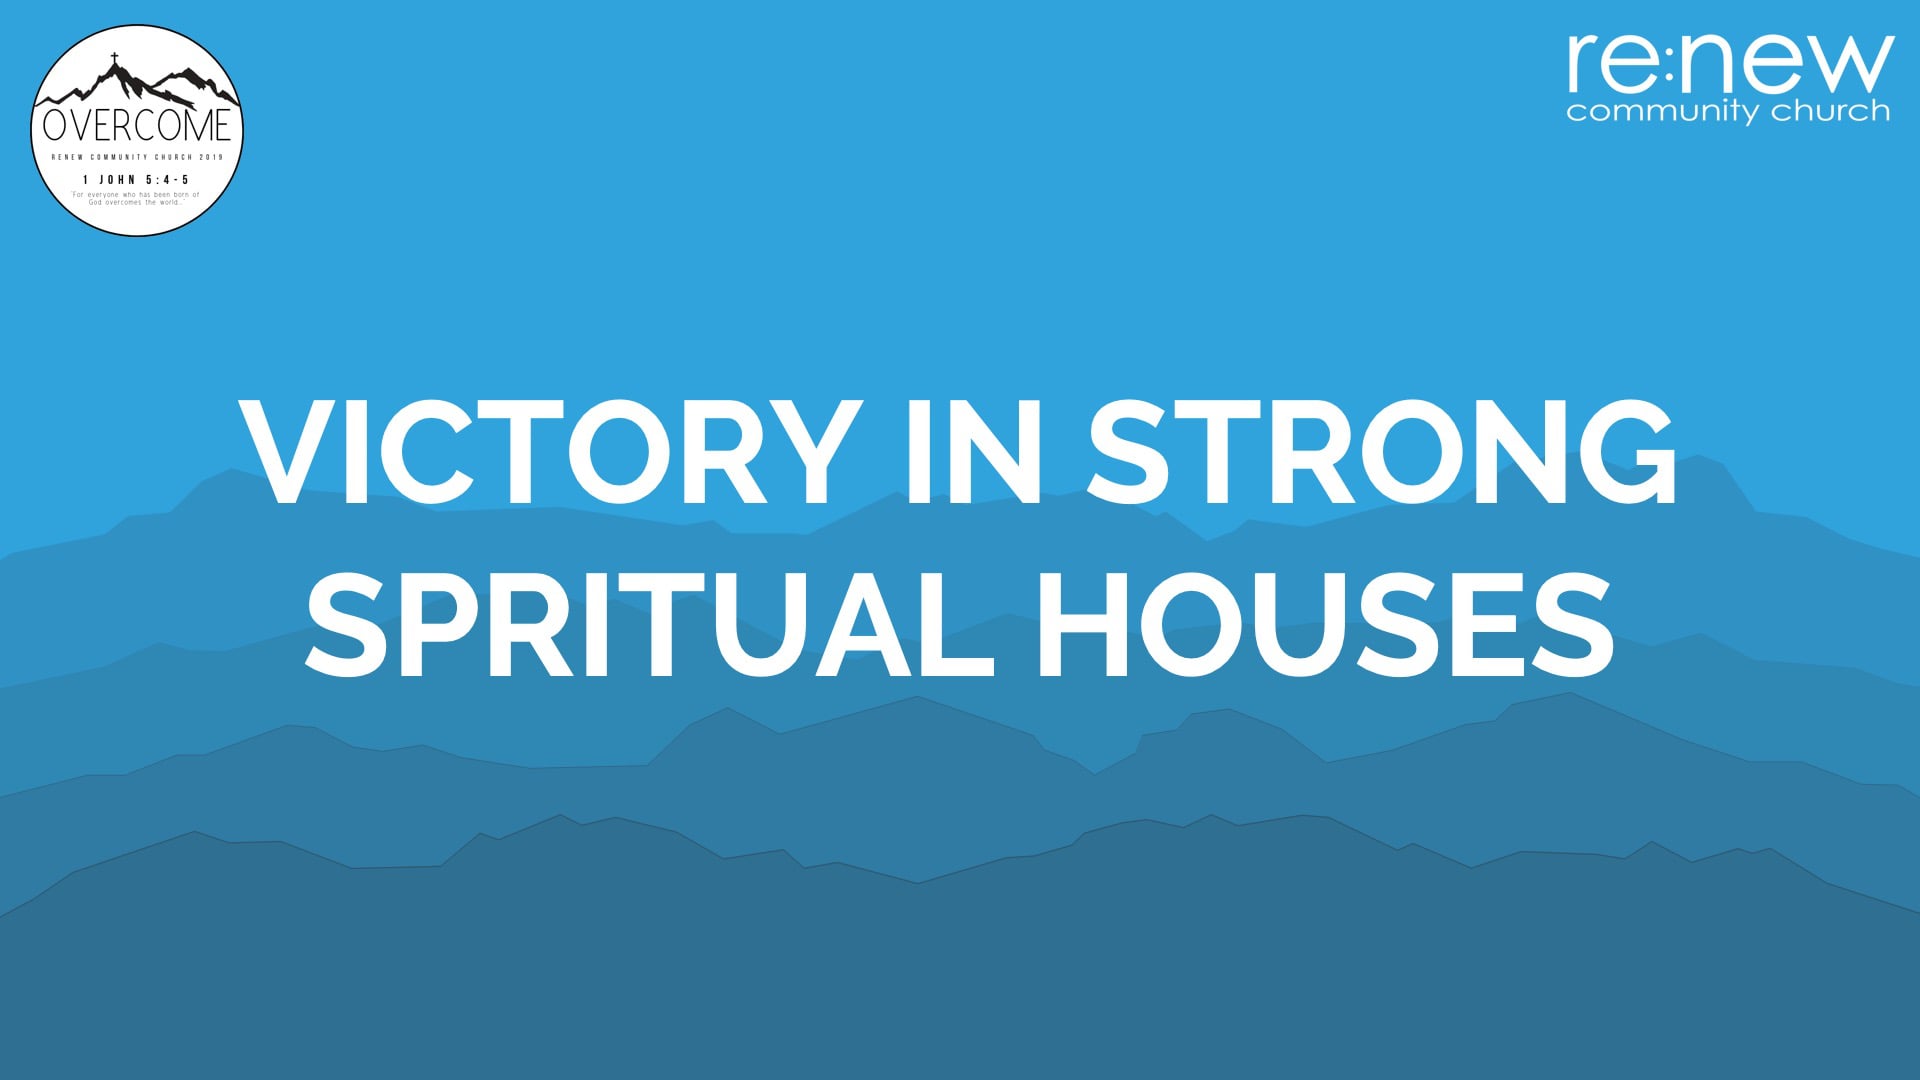 Victory in Strong Spritual Houses